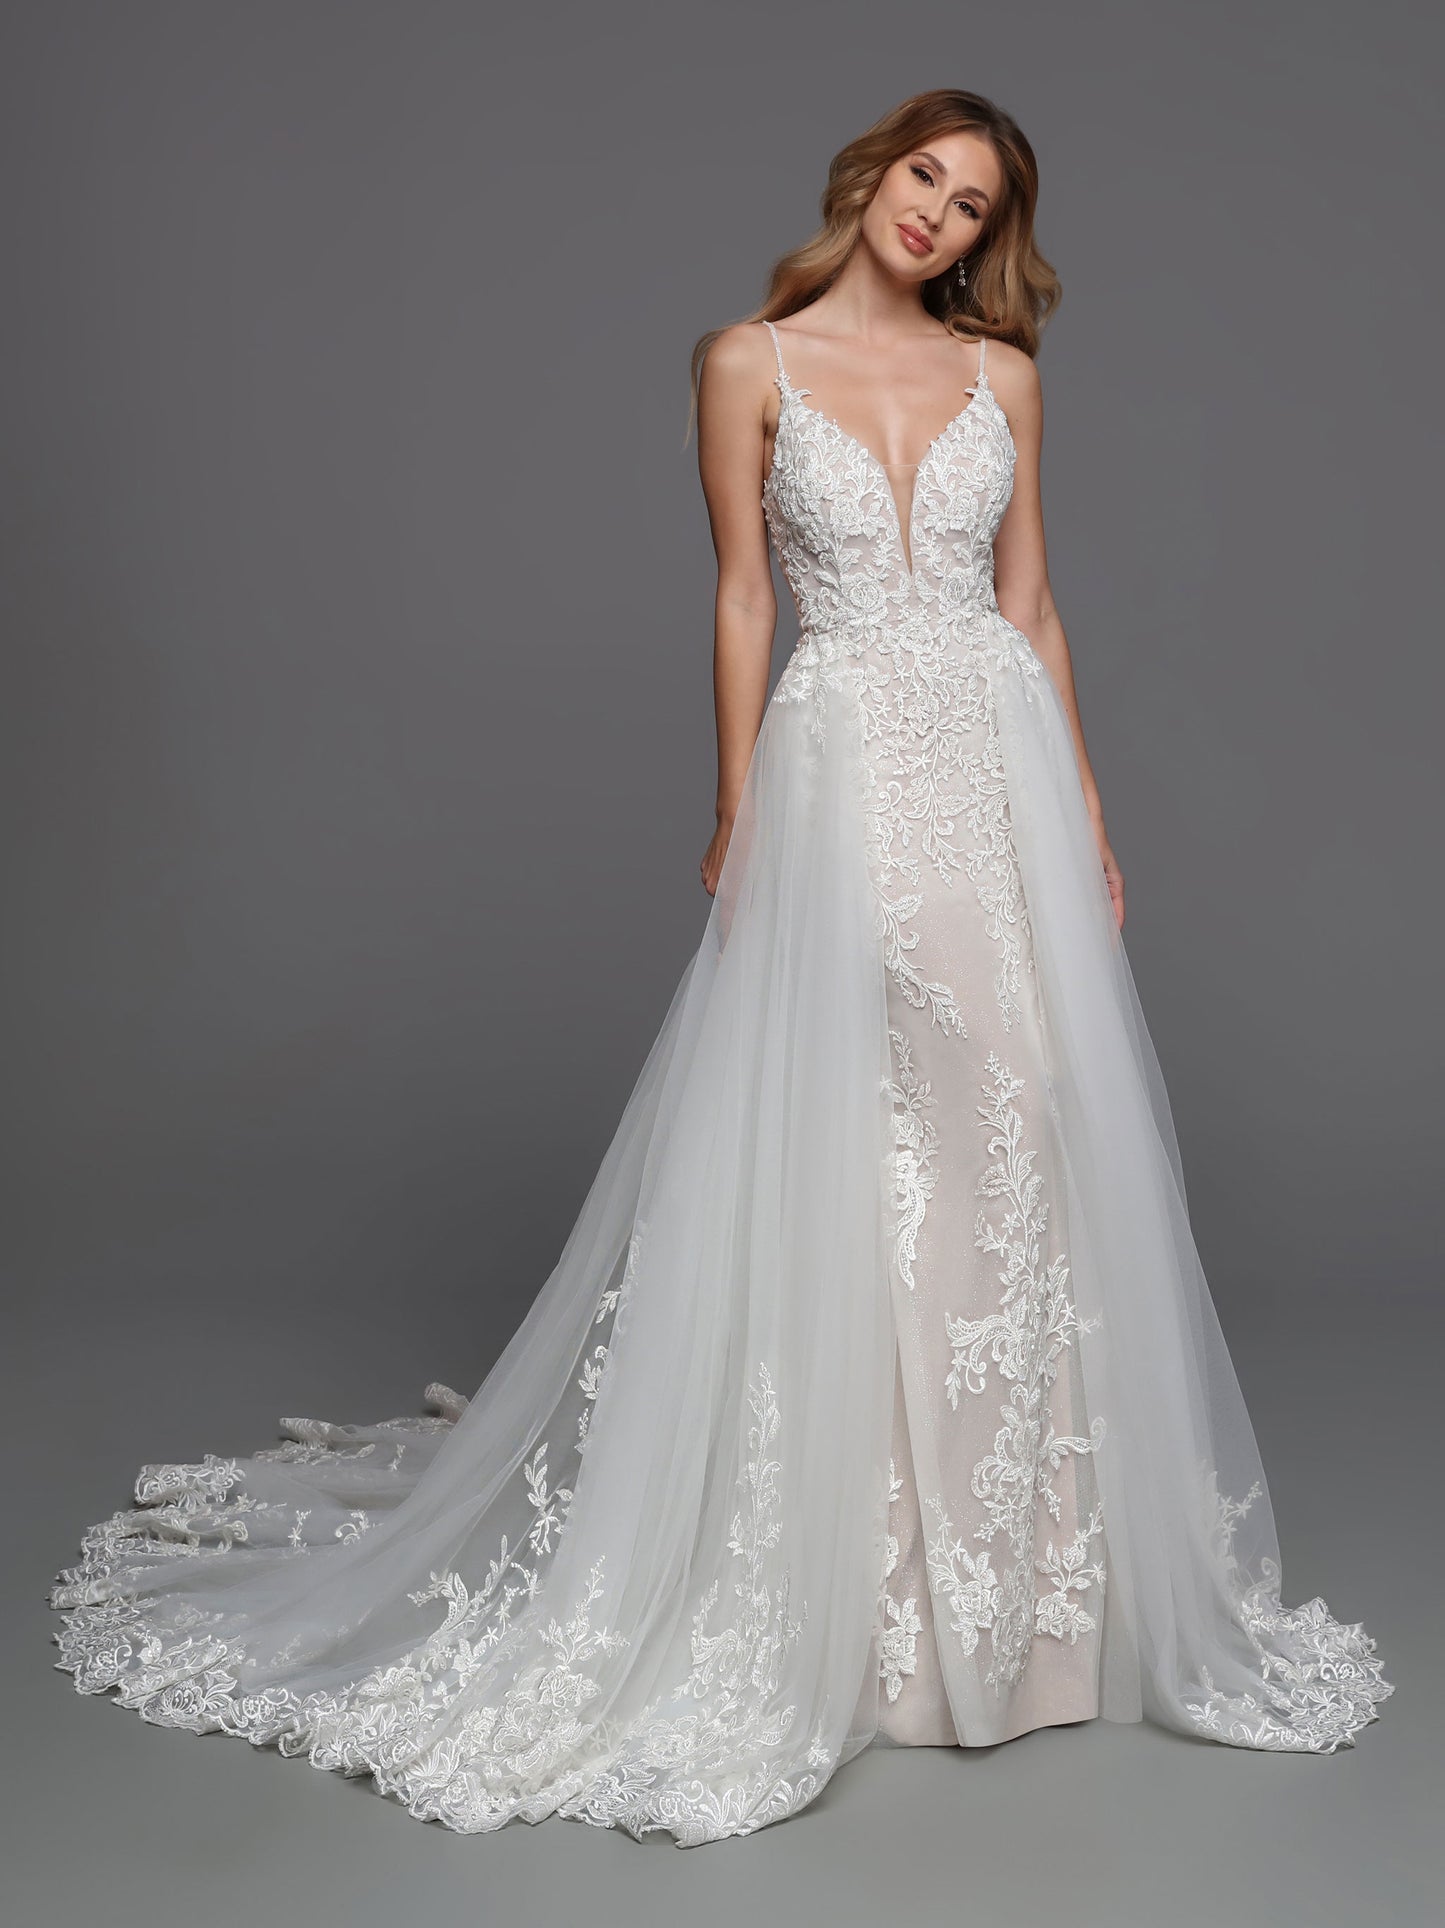 DaVinci Bridal 50720 Lace Wedding Dress Column Detachable Overskirt V Neckline Sheer Back  This is a long beautiful wedding dress with a deep v neckline and sheer panel.  The back is mid back and has sheer lace.  It is a long column bridal gown with a long train. 